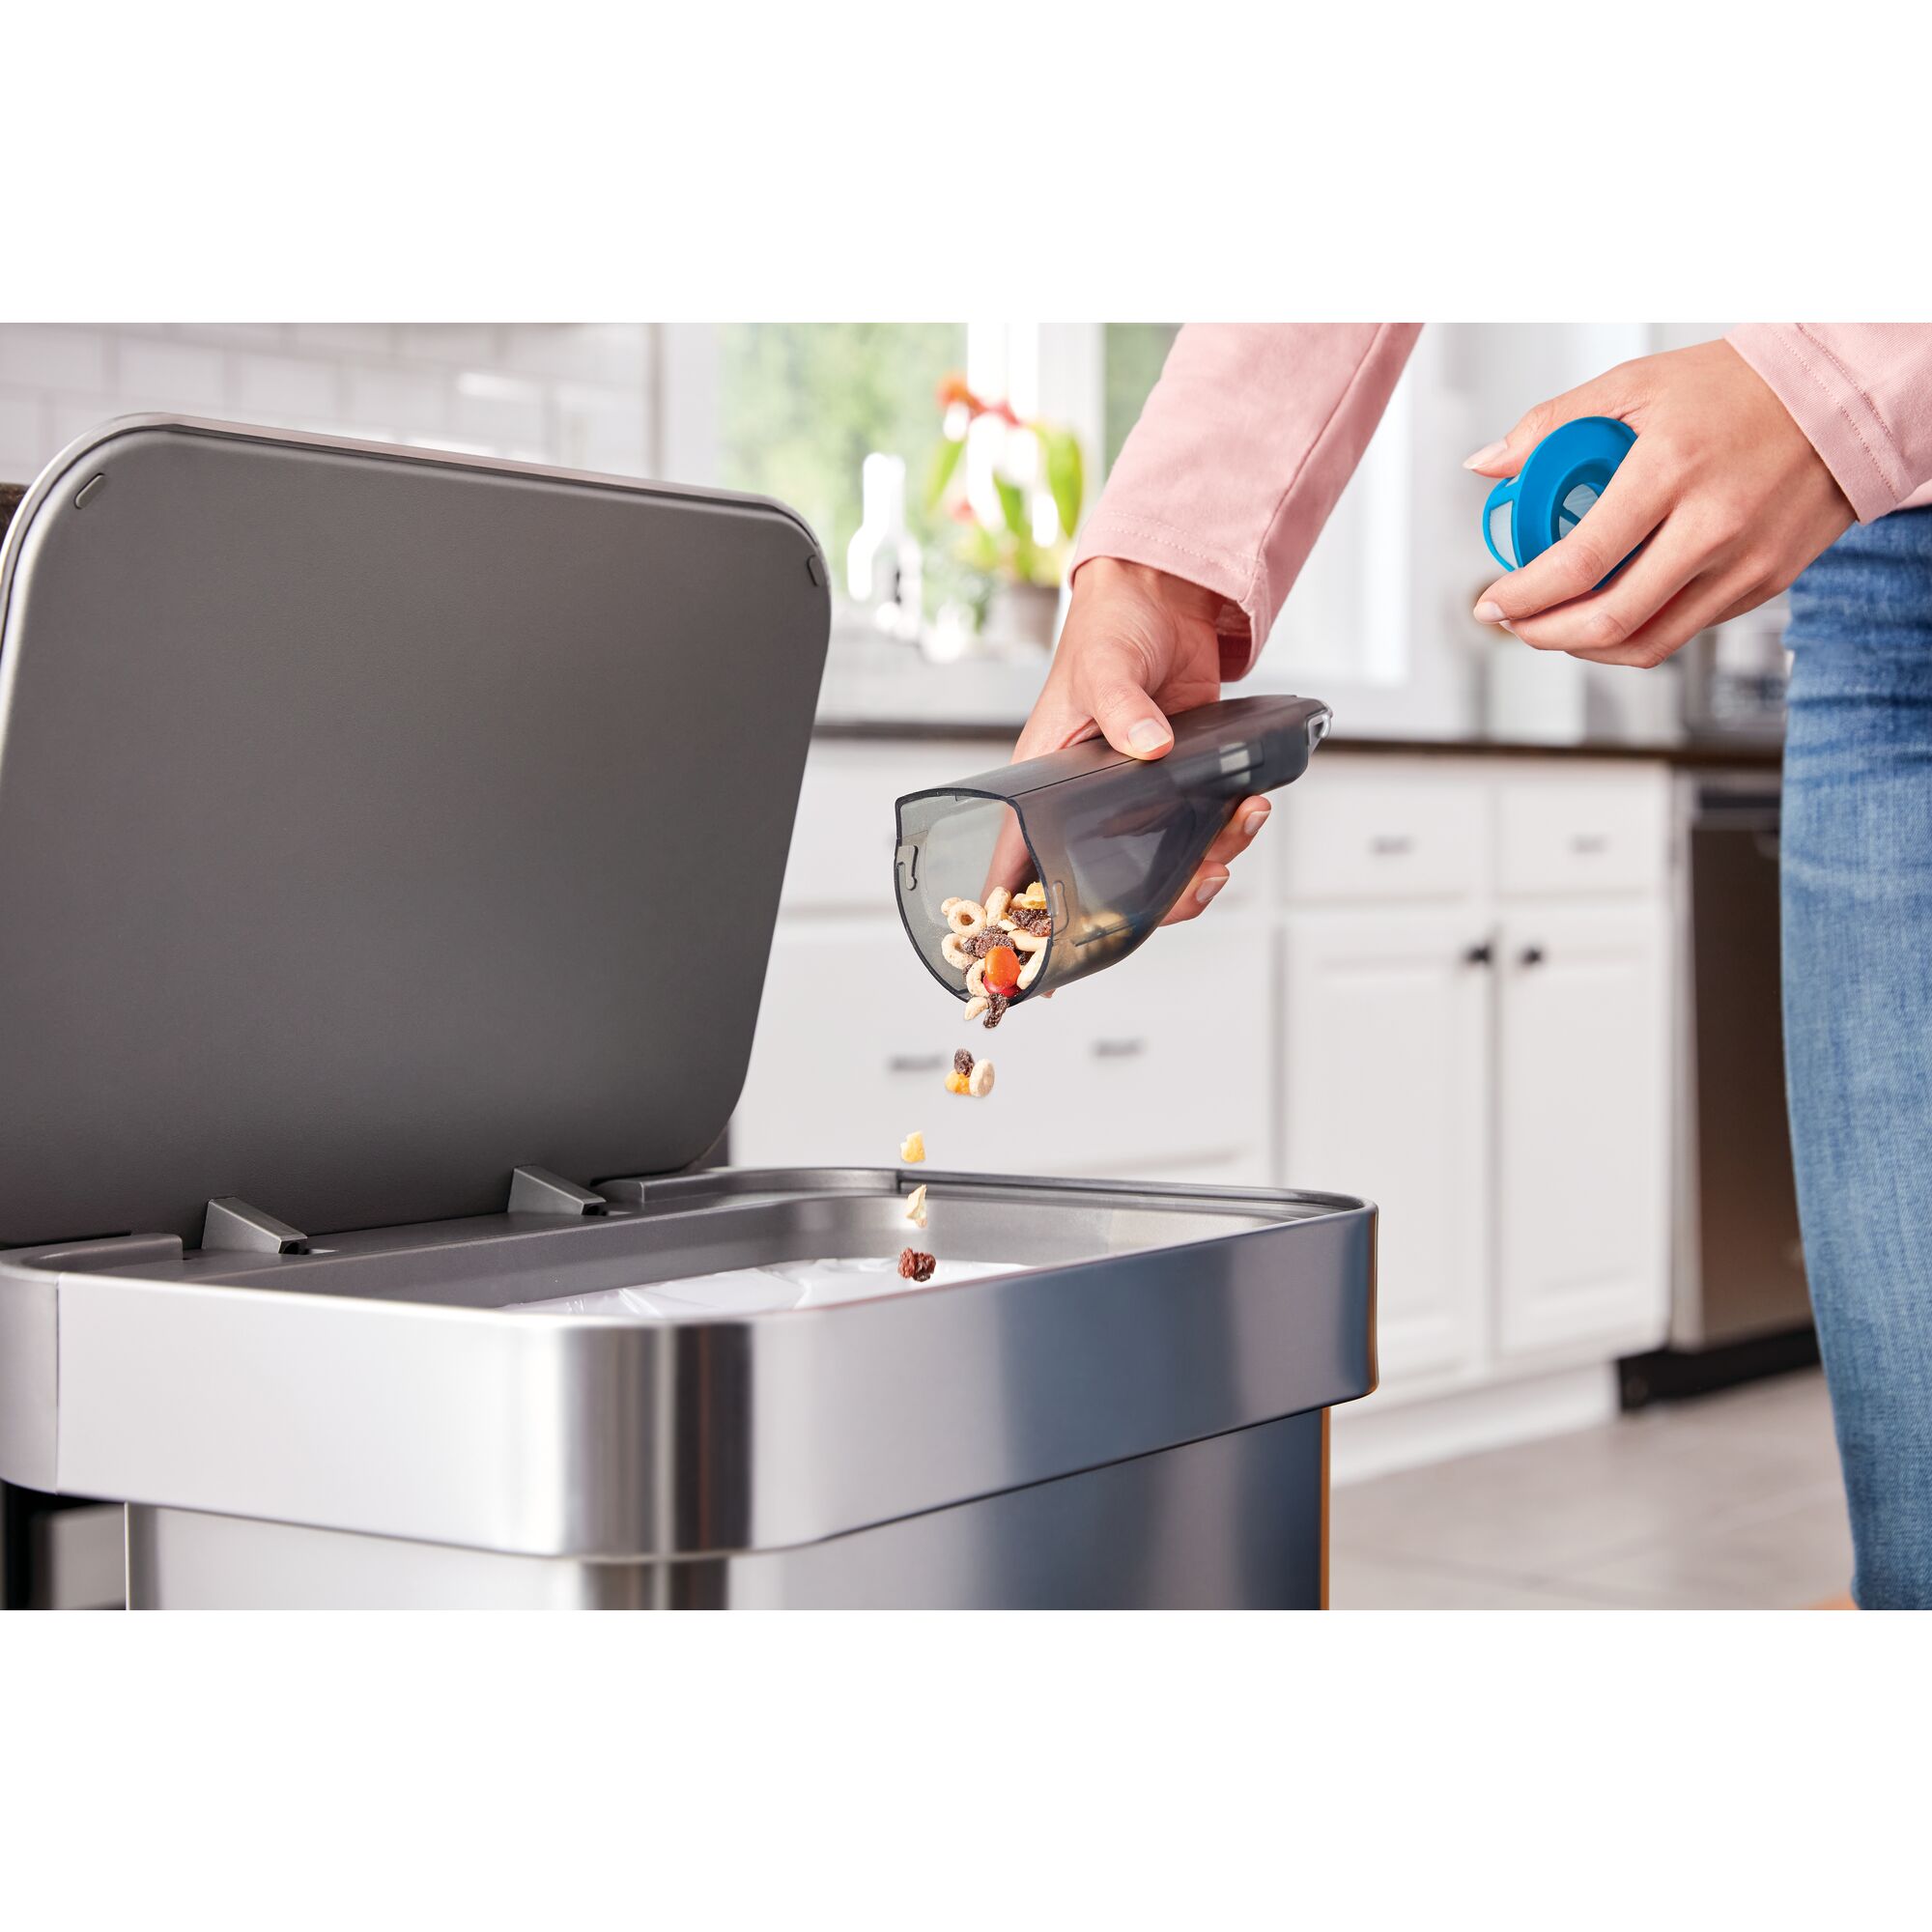 Easy to empty bowl feature of dustbuster 12 volt MAX AdvancedClean cordless hand vacuum.